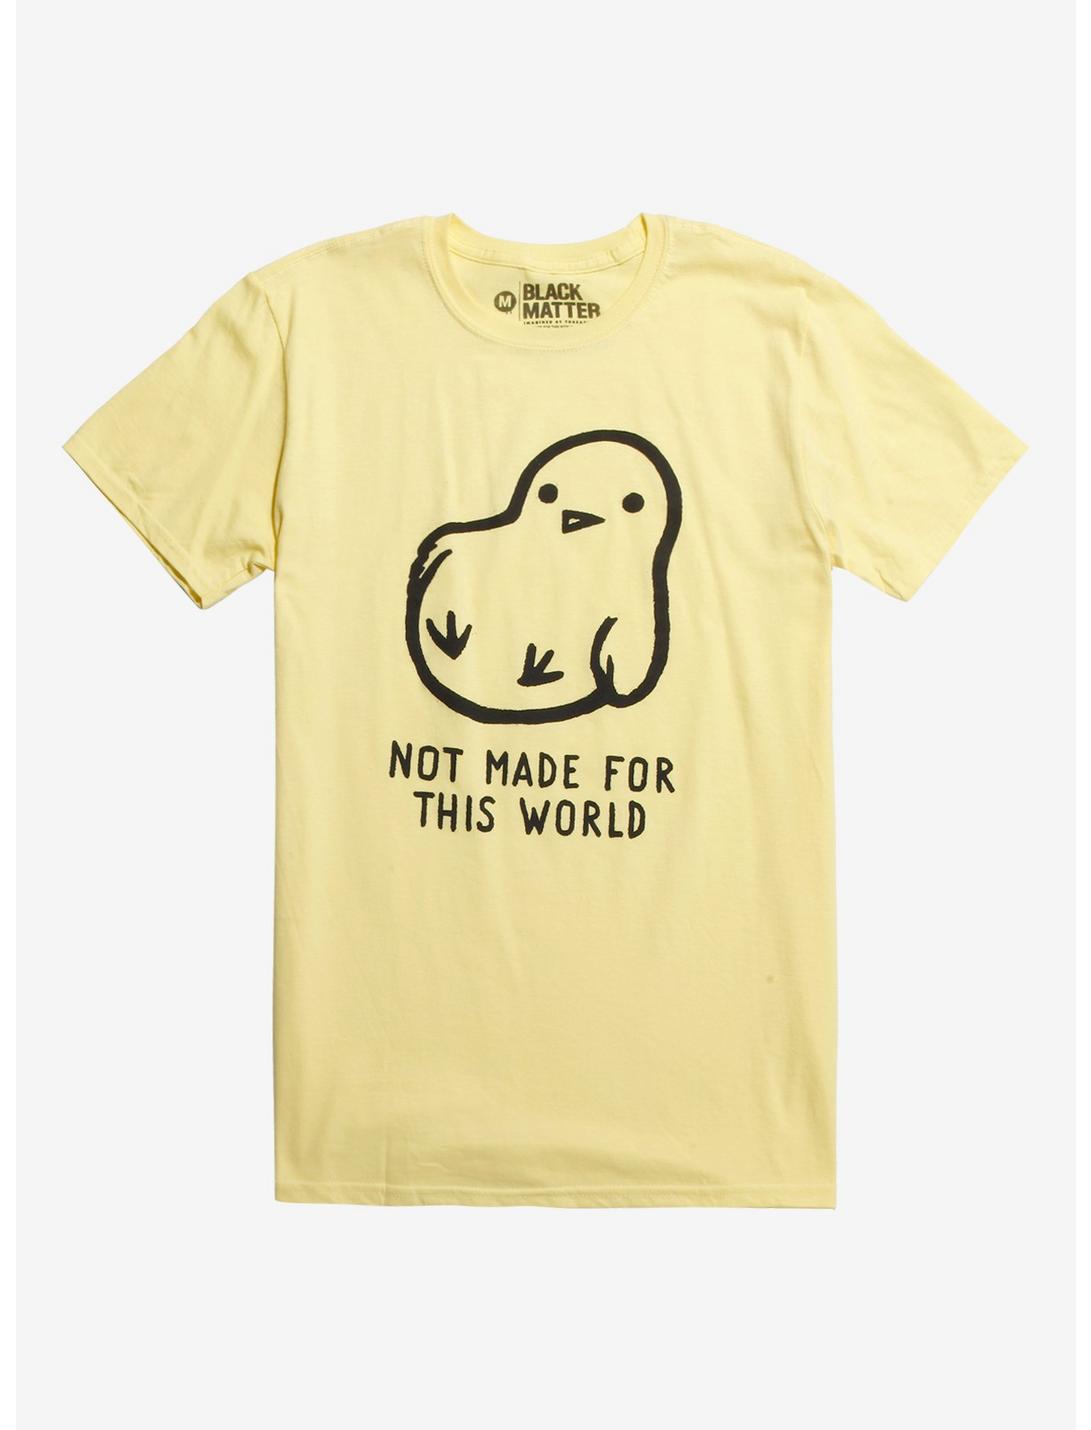 Not Made For This World T-Shirt, YELLOW, hi-res